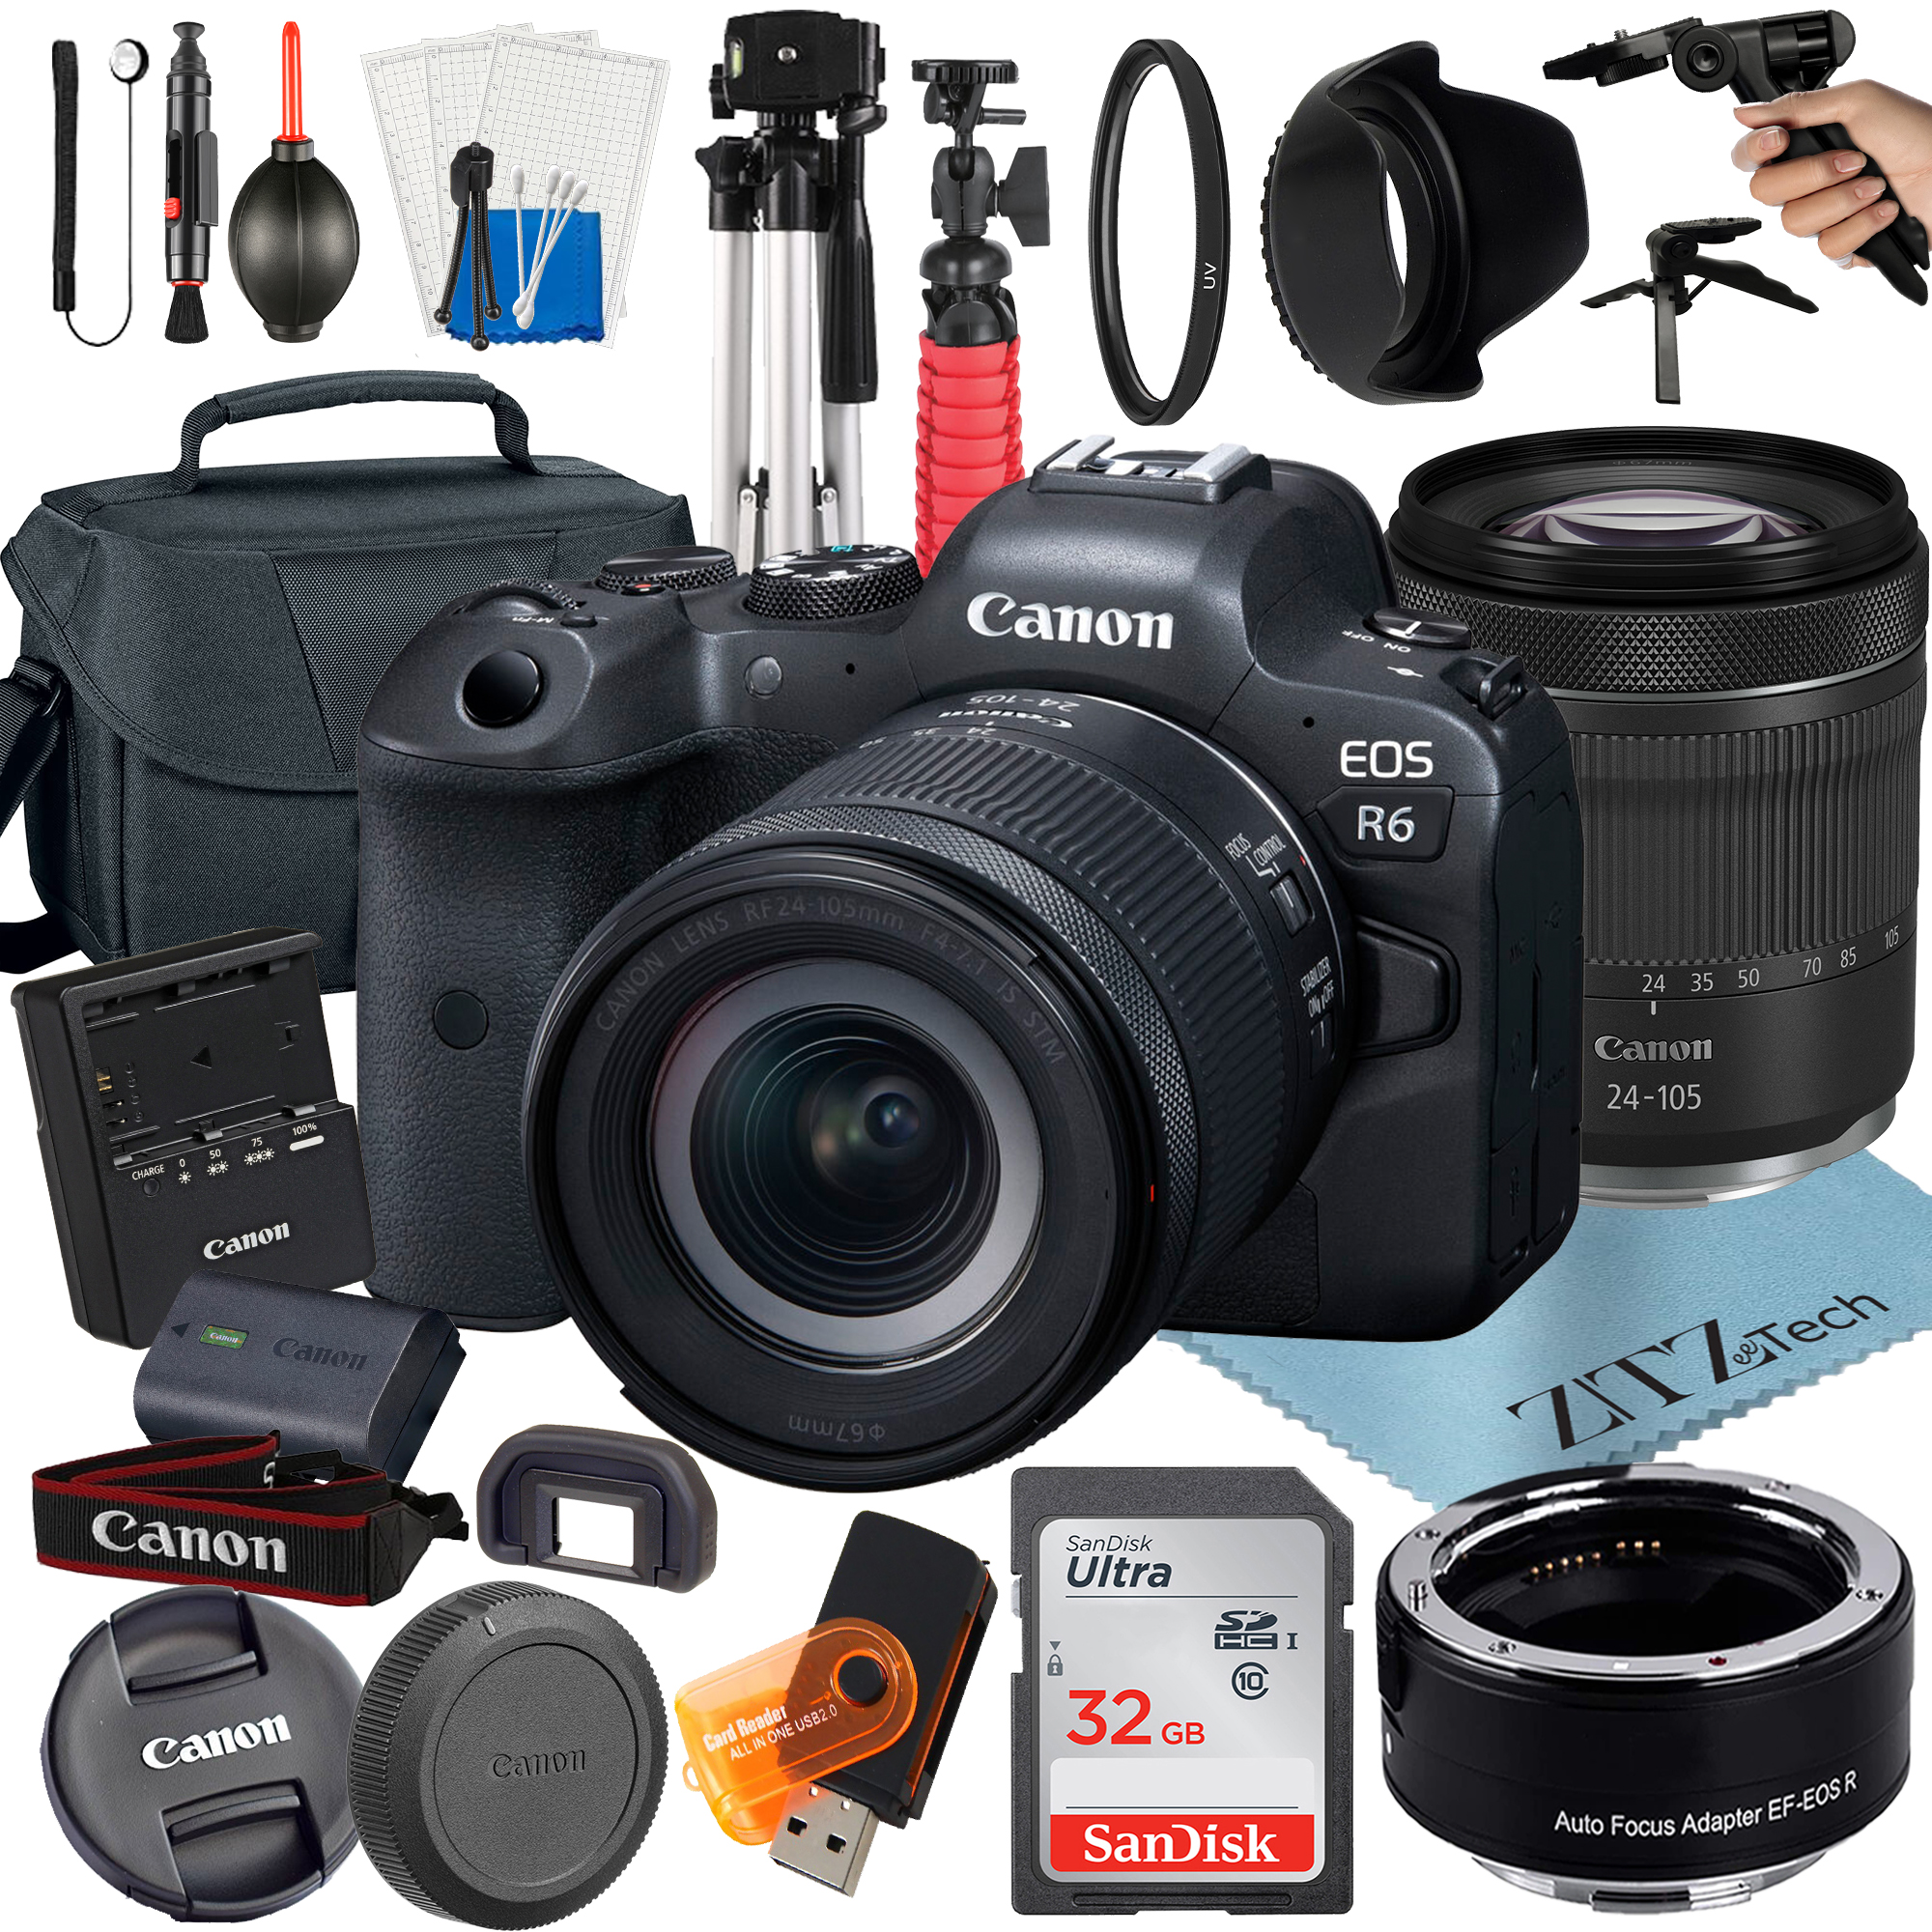 Canon EOS R6 Mirrorless Digital Camera with RF 24-105mm STM Lens + Mount Adapter + 32GB SanDisk + ZeeTech Accessory